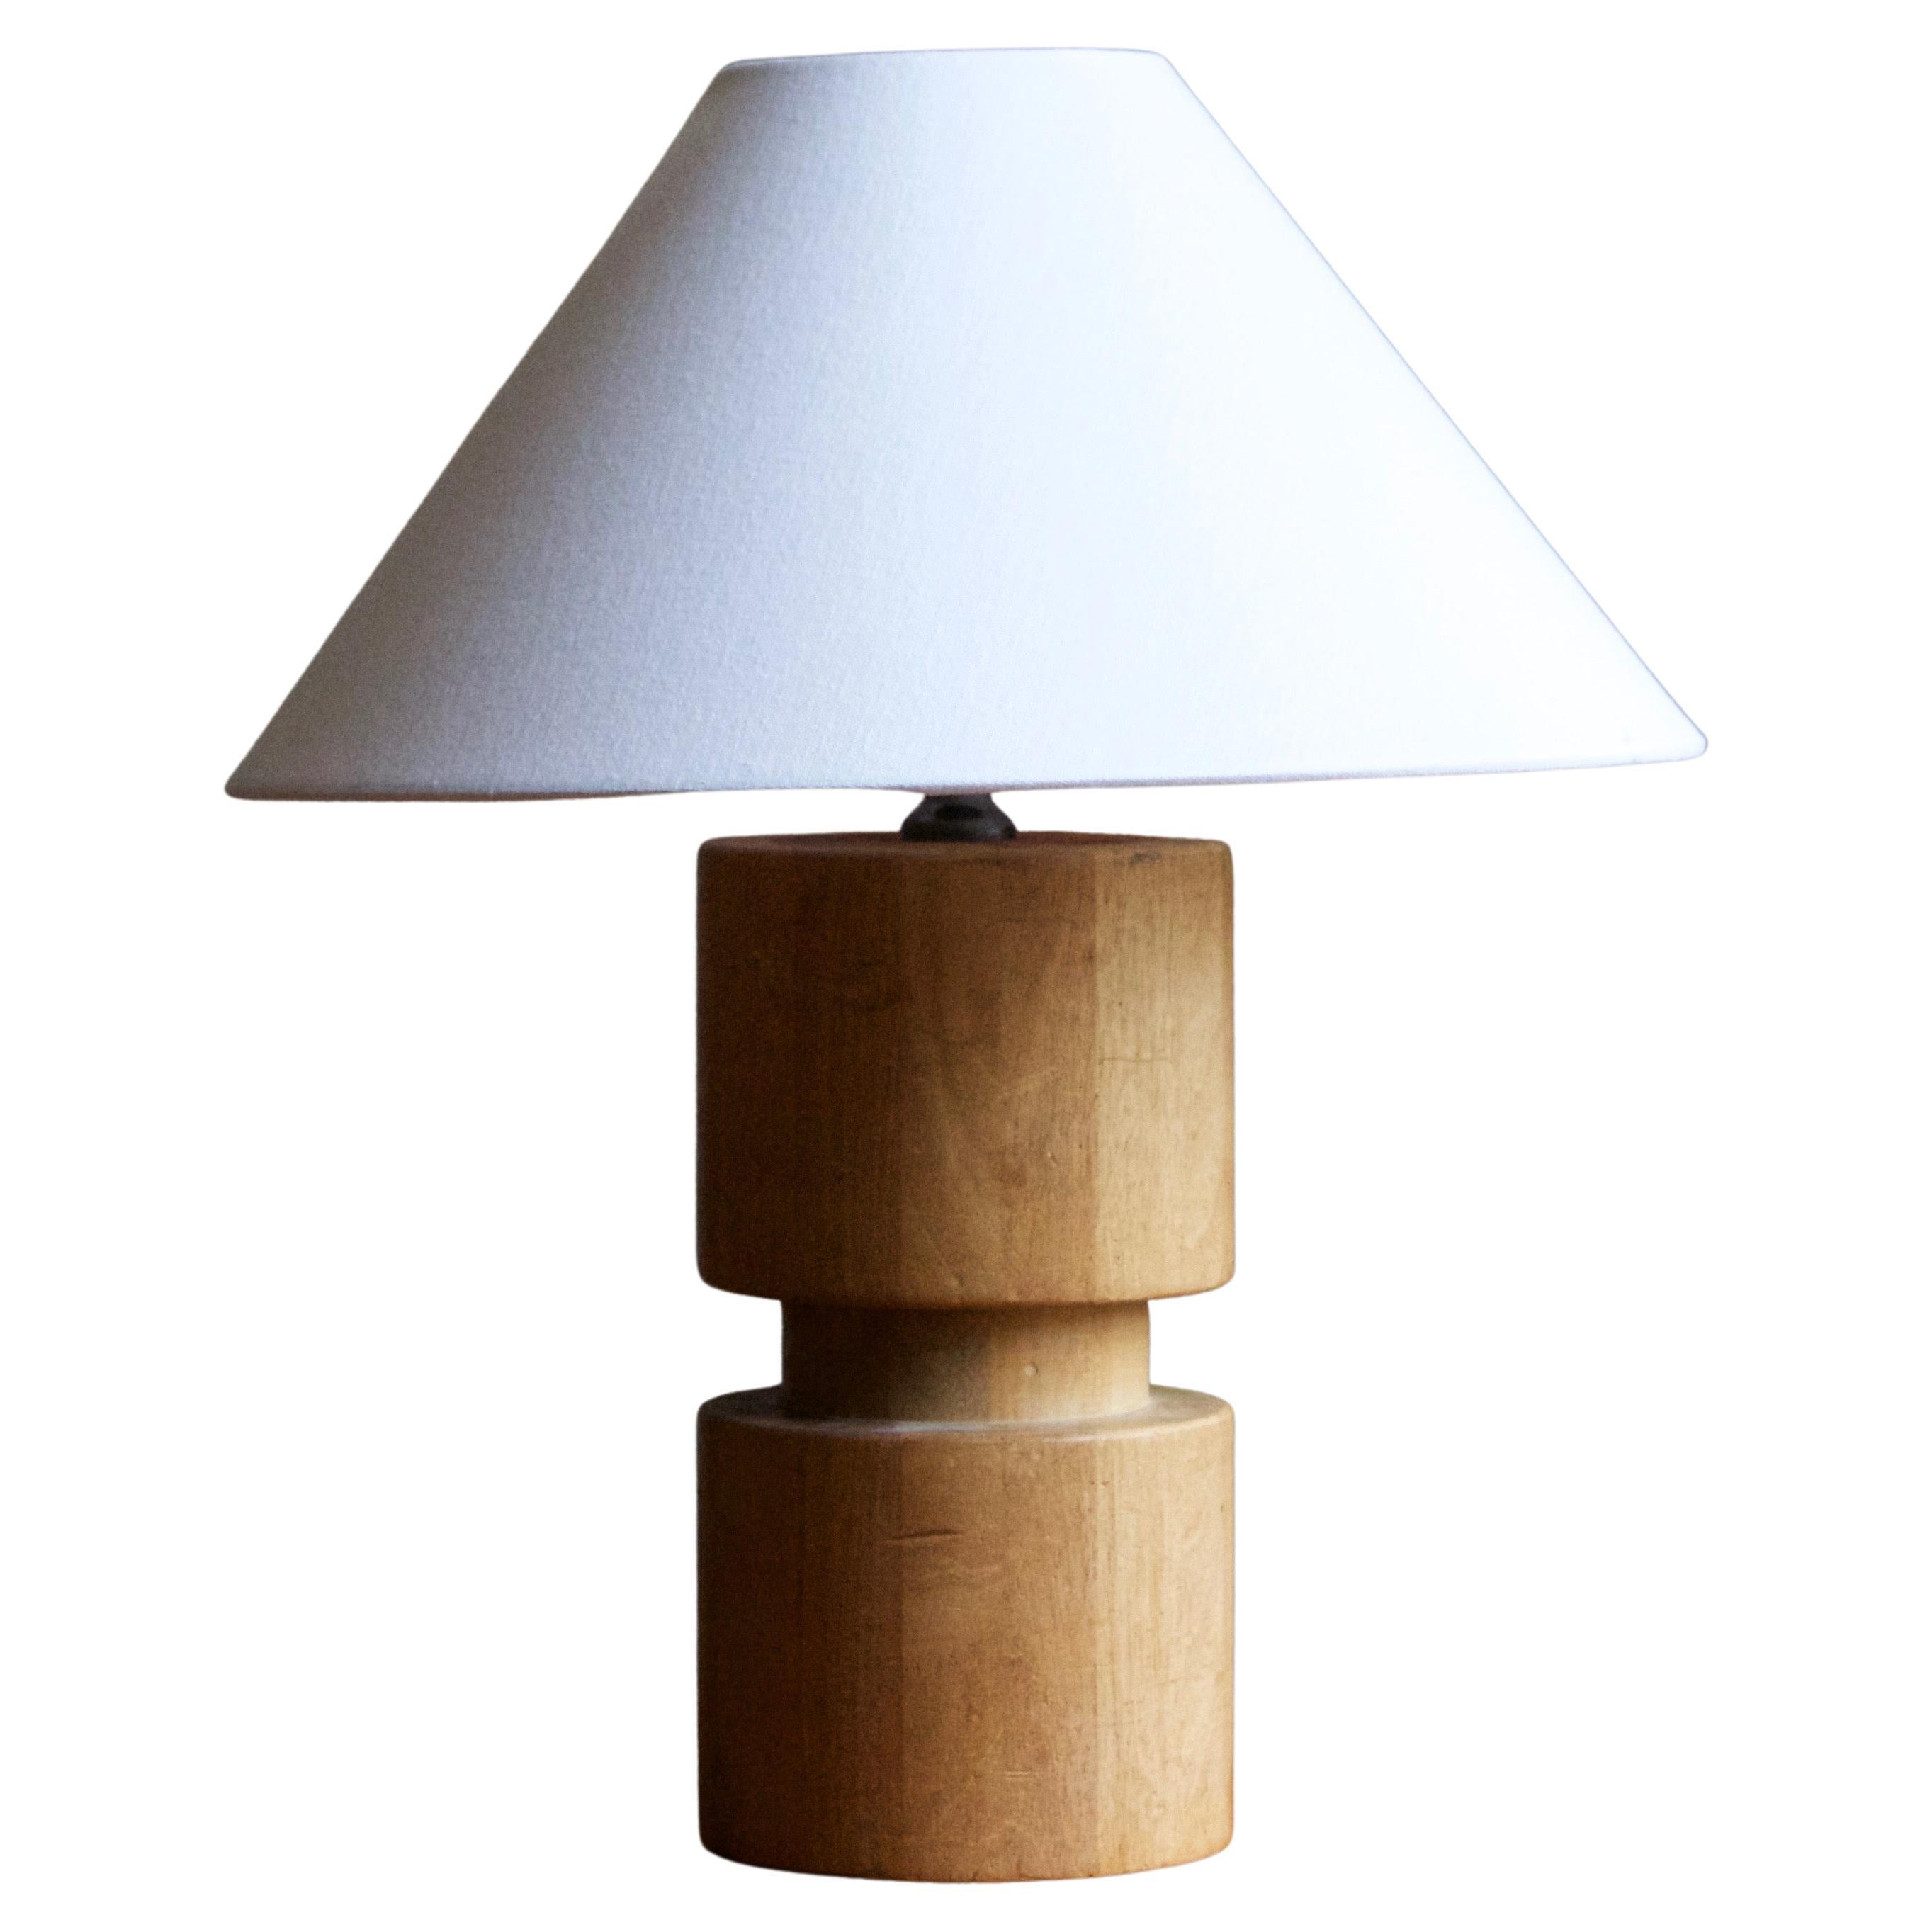 Swedish, Sculptural Table Lamp, Solid Wood, Brass, Sweden, 1940s